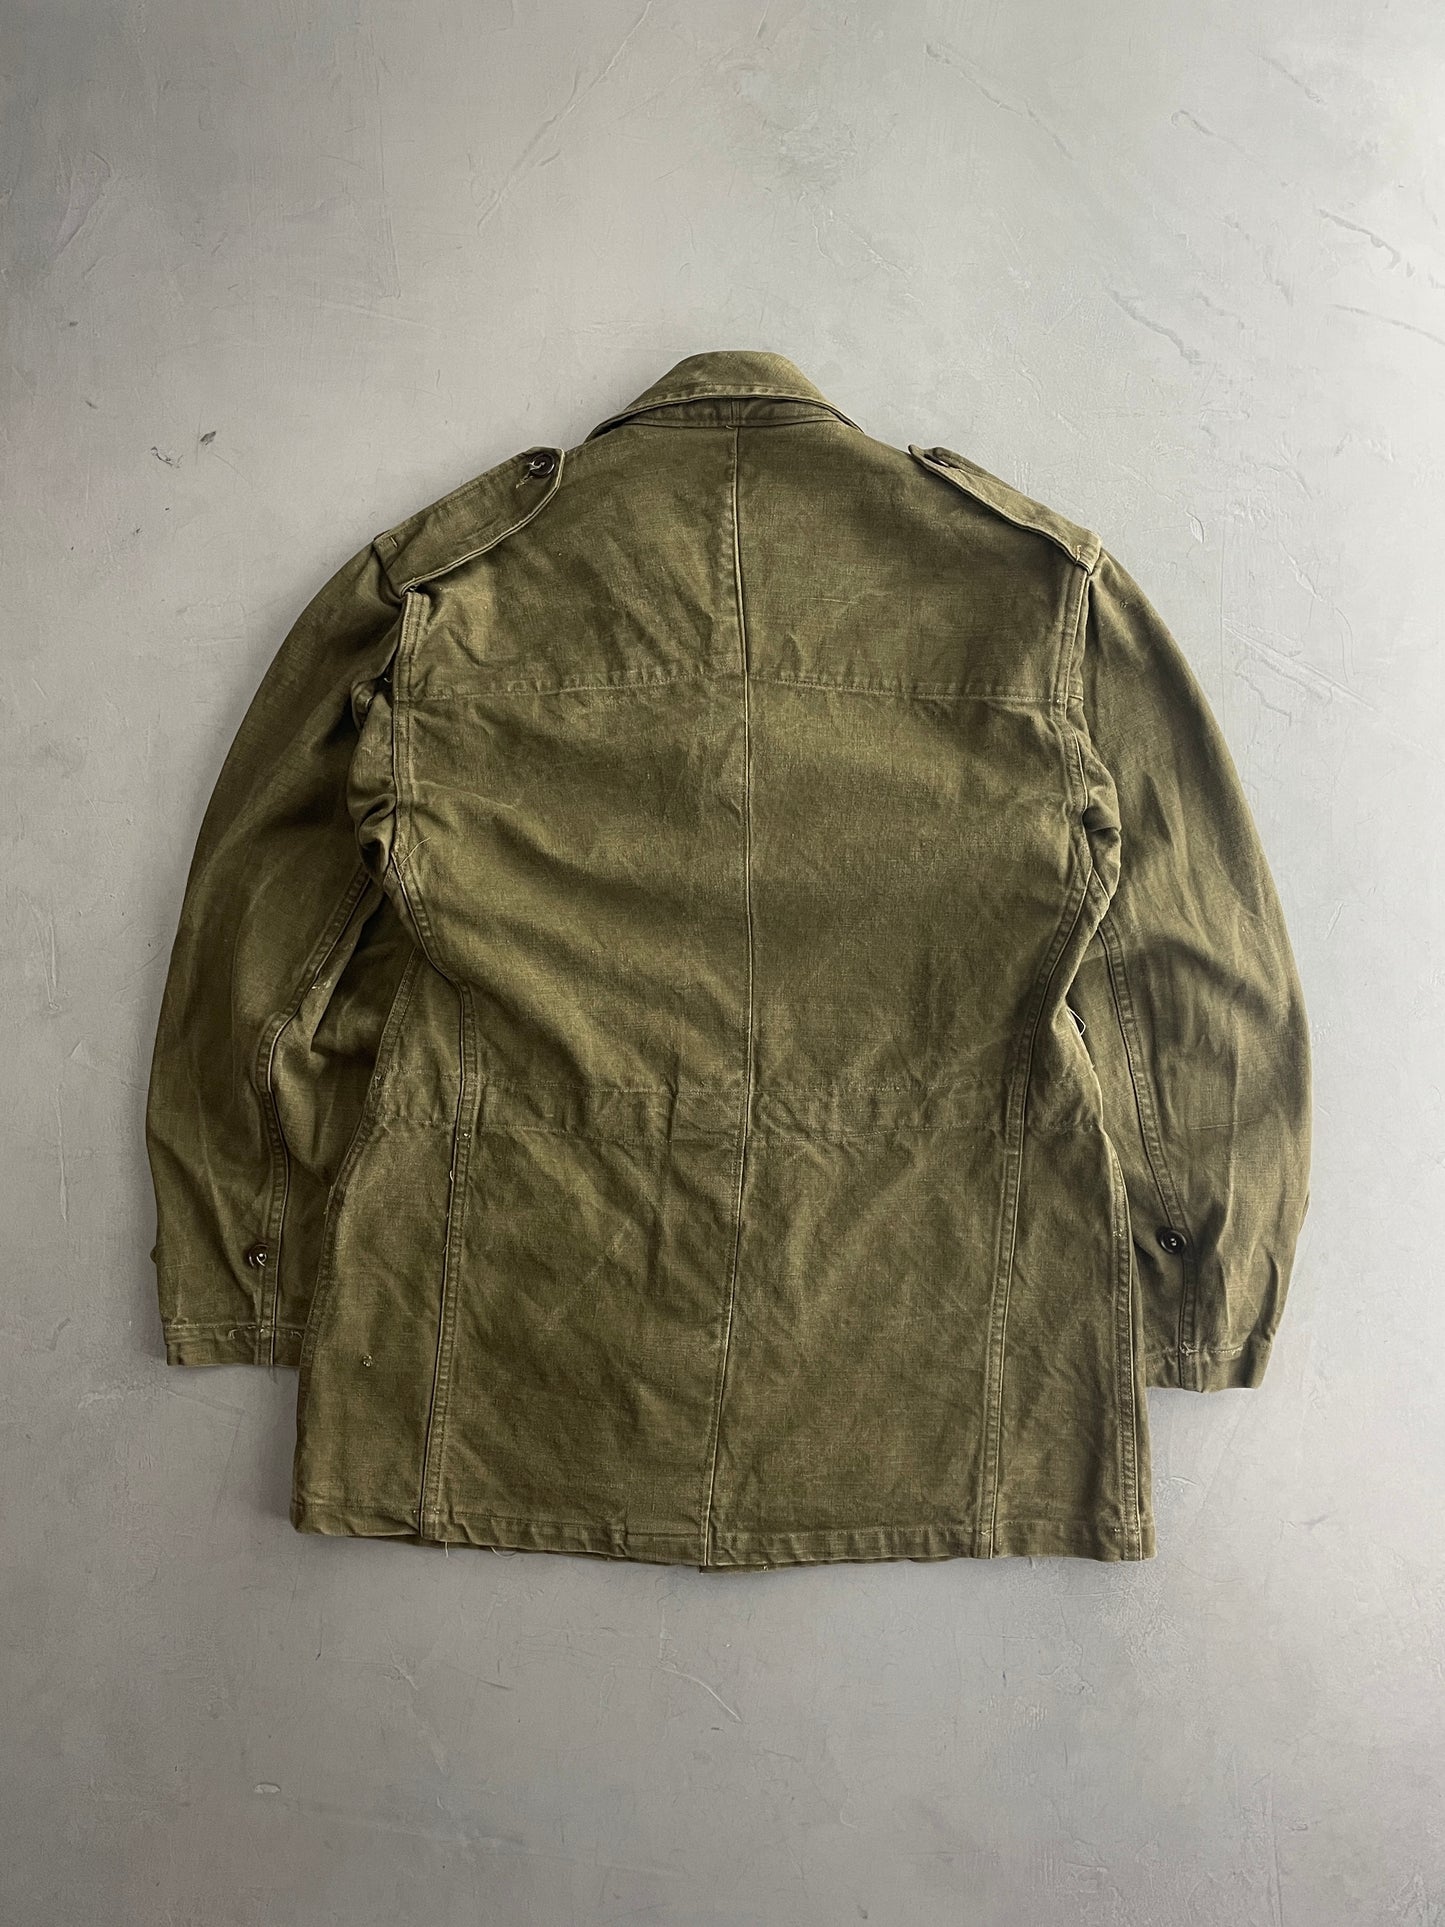 50's French Army Jacket [M]